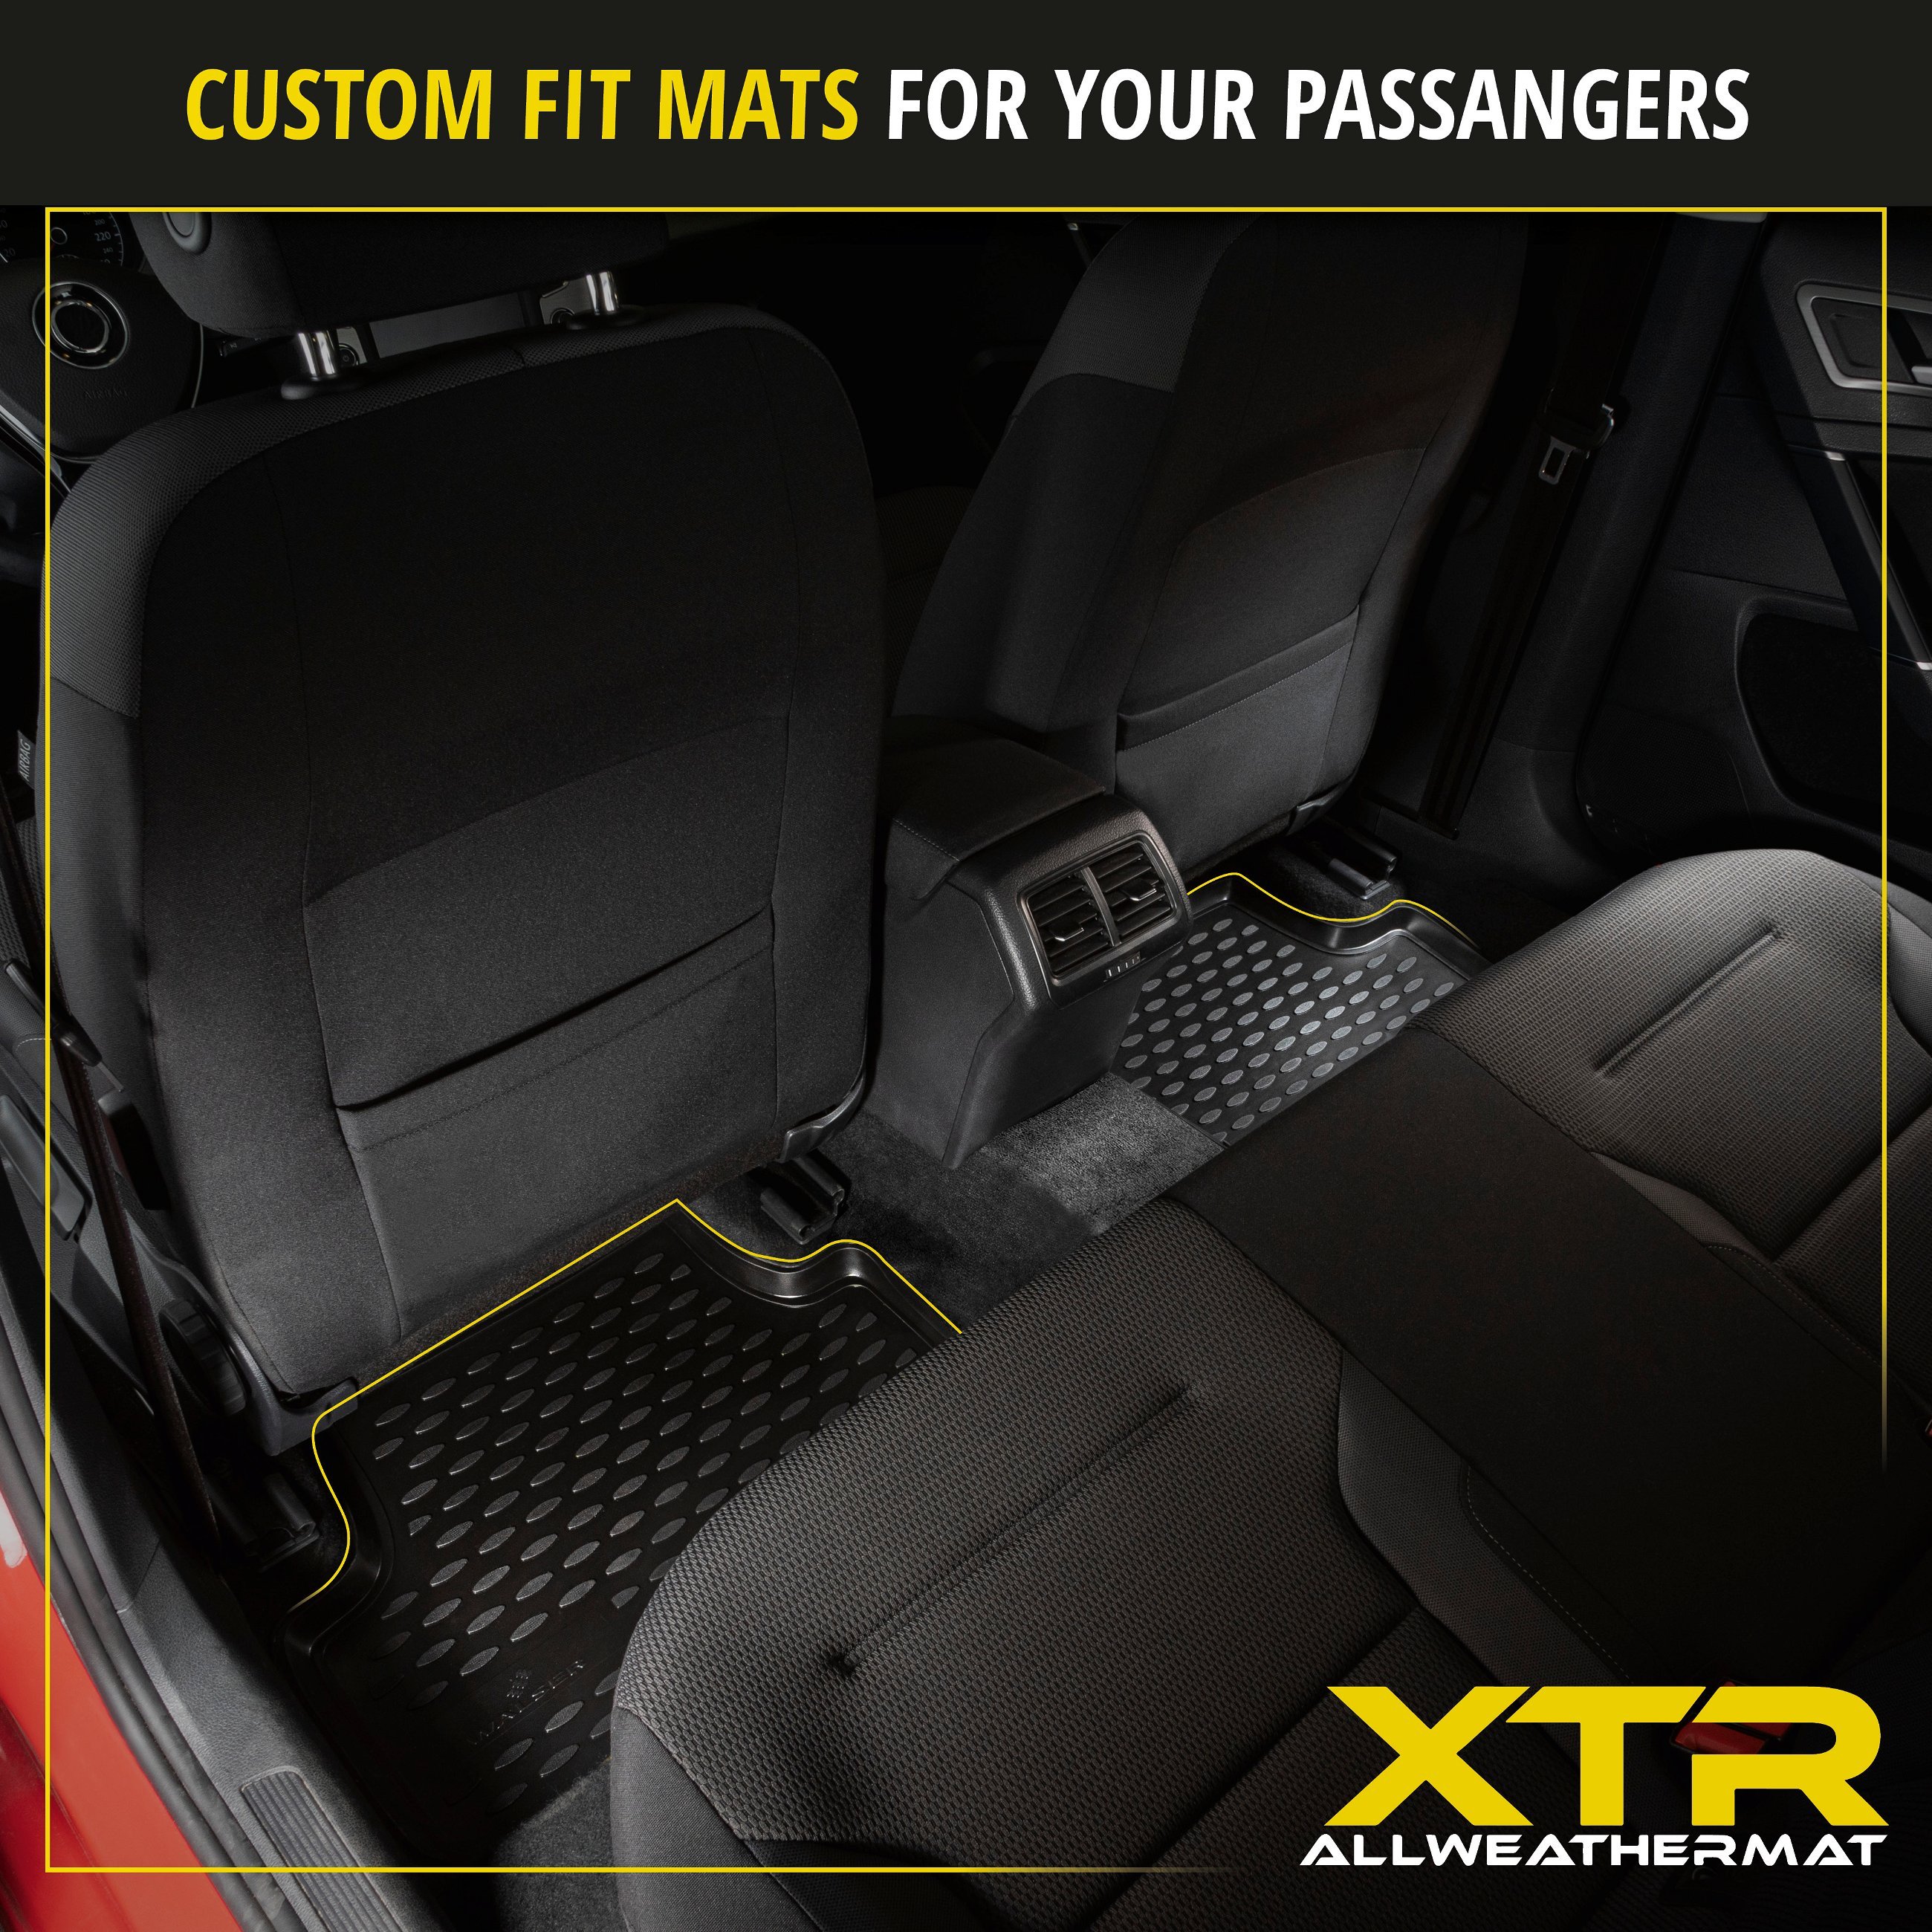 XTR Rubber Mats for Audi Q5 05/2016-Today